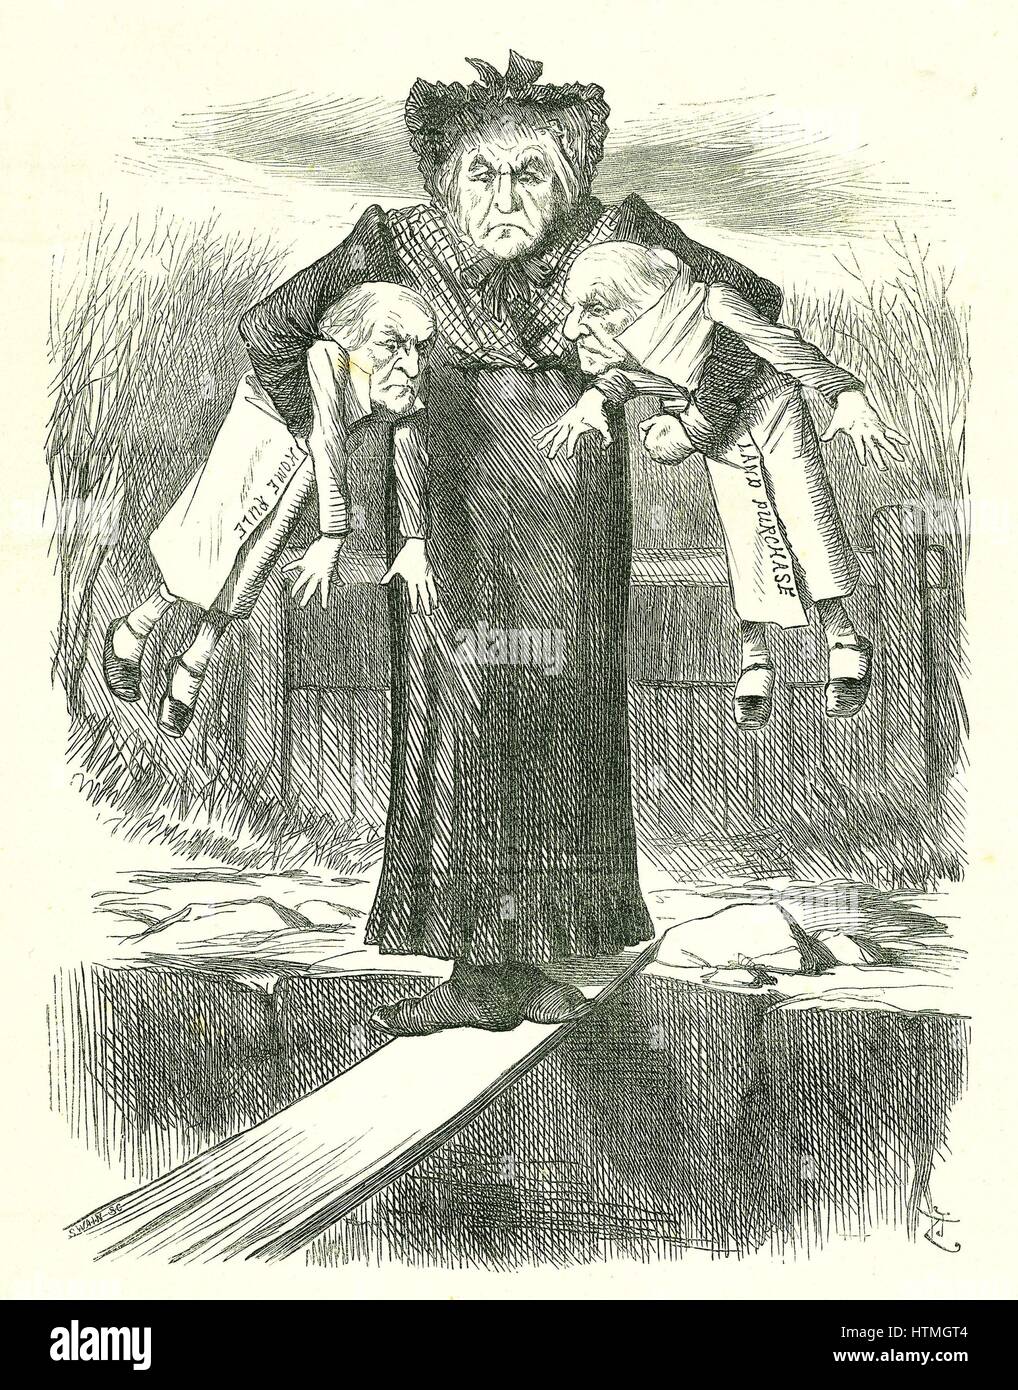 'Set Down Two, and Carry One.'?: Gladstone, the British Prime Minister, in a quandary over which of the controversial Irish bills to jettison. John Tenniel cartoon from 'Punch', London, 3 April 1886. Stock Photo